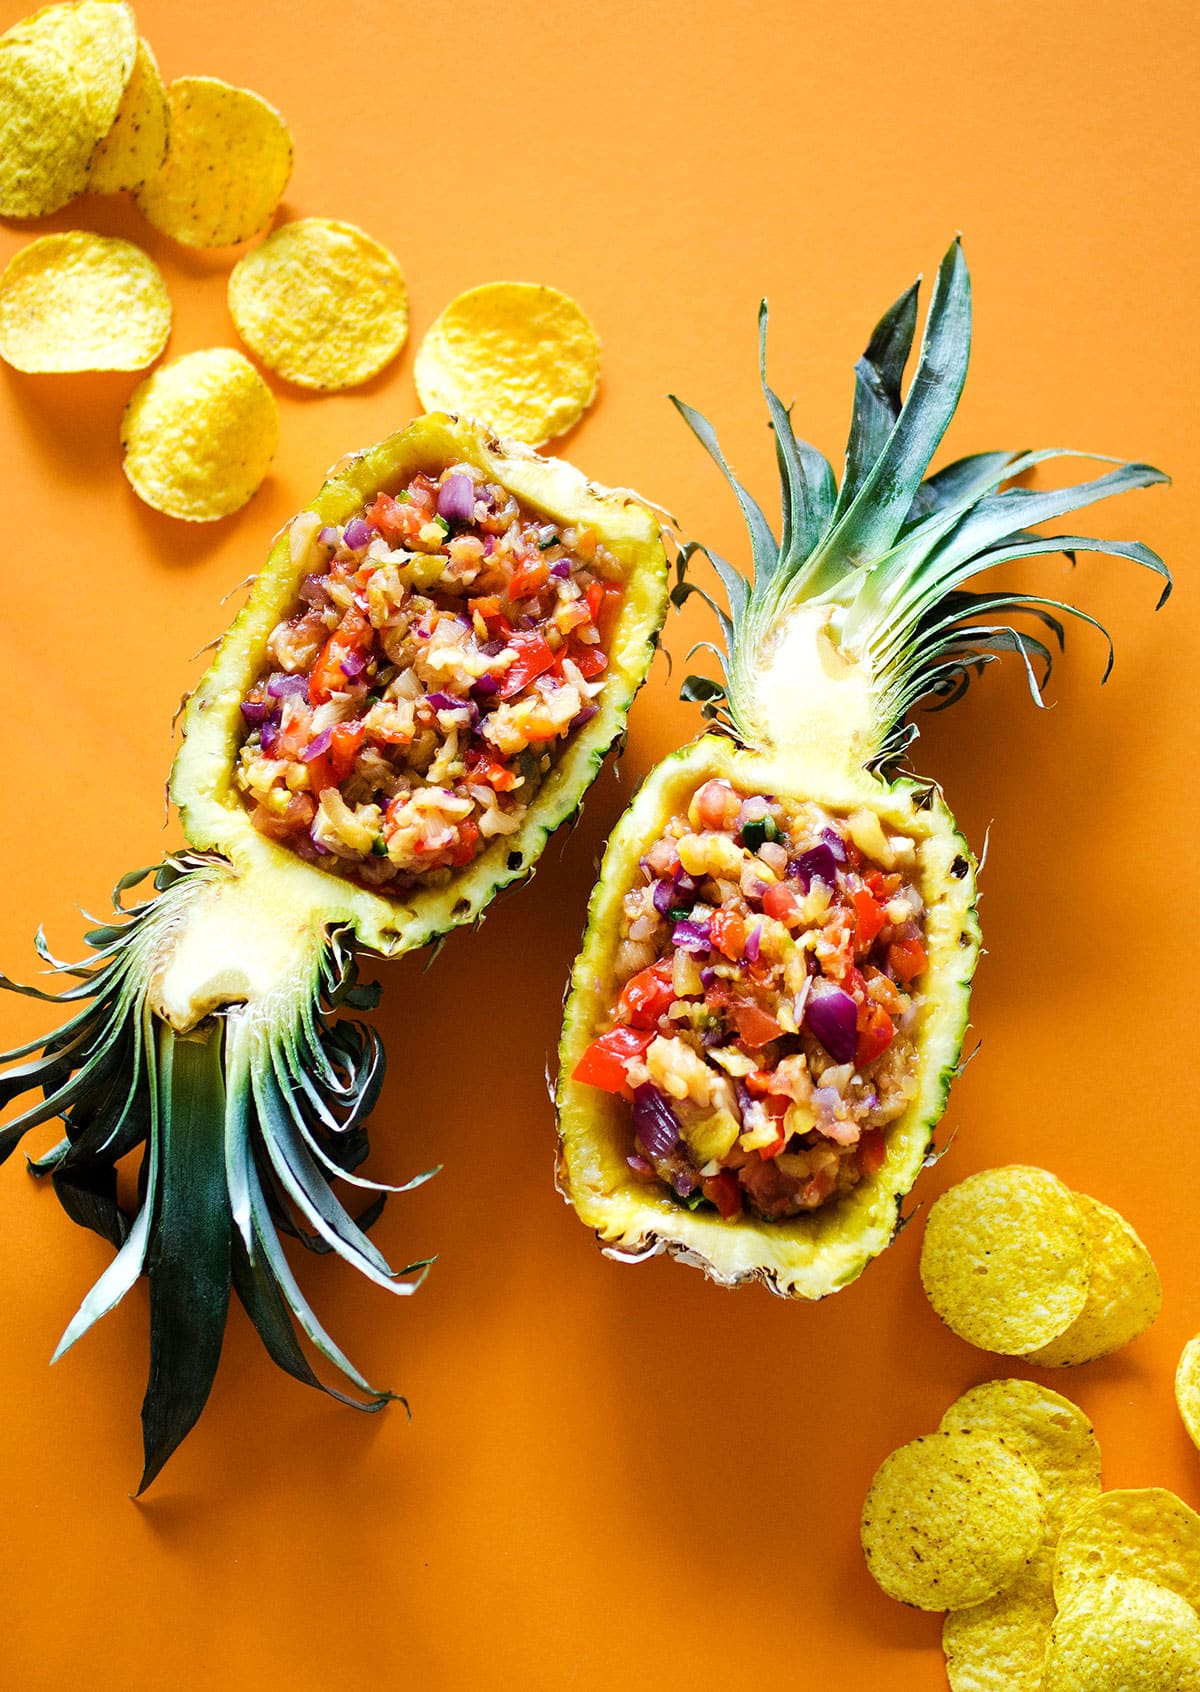 Pineapple salsa served in the pineapple on an orange background.